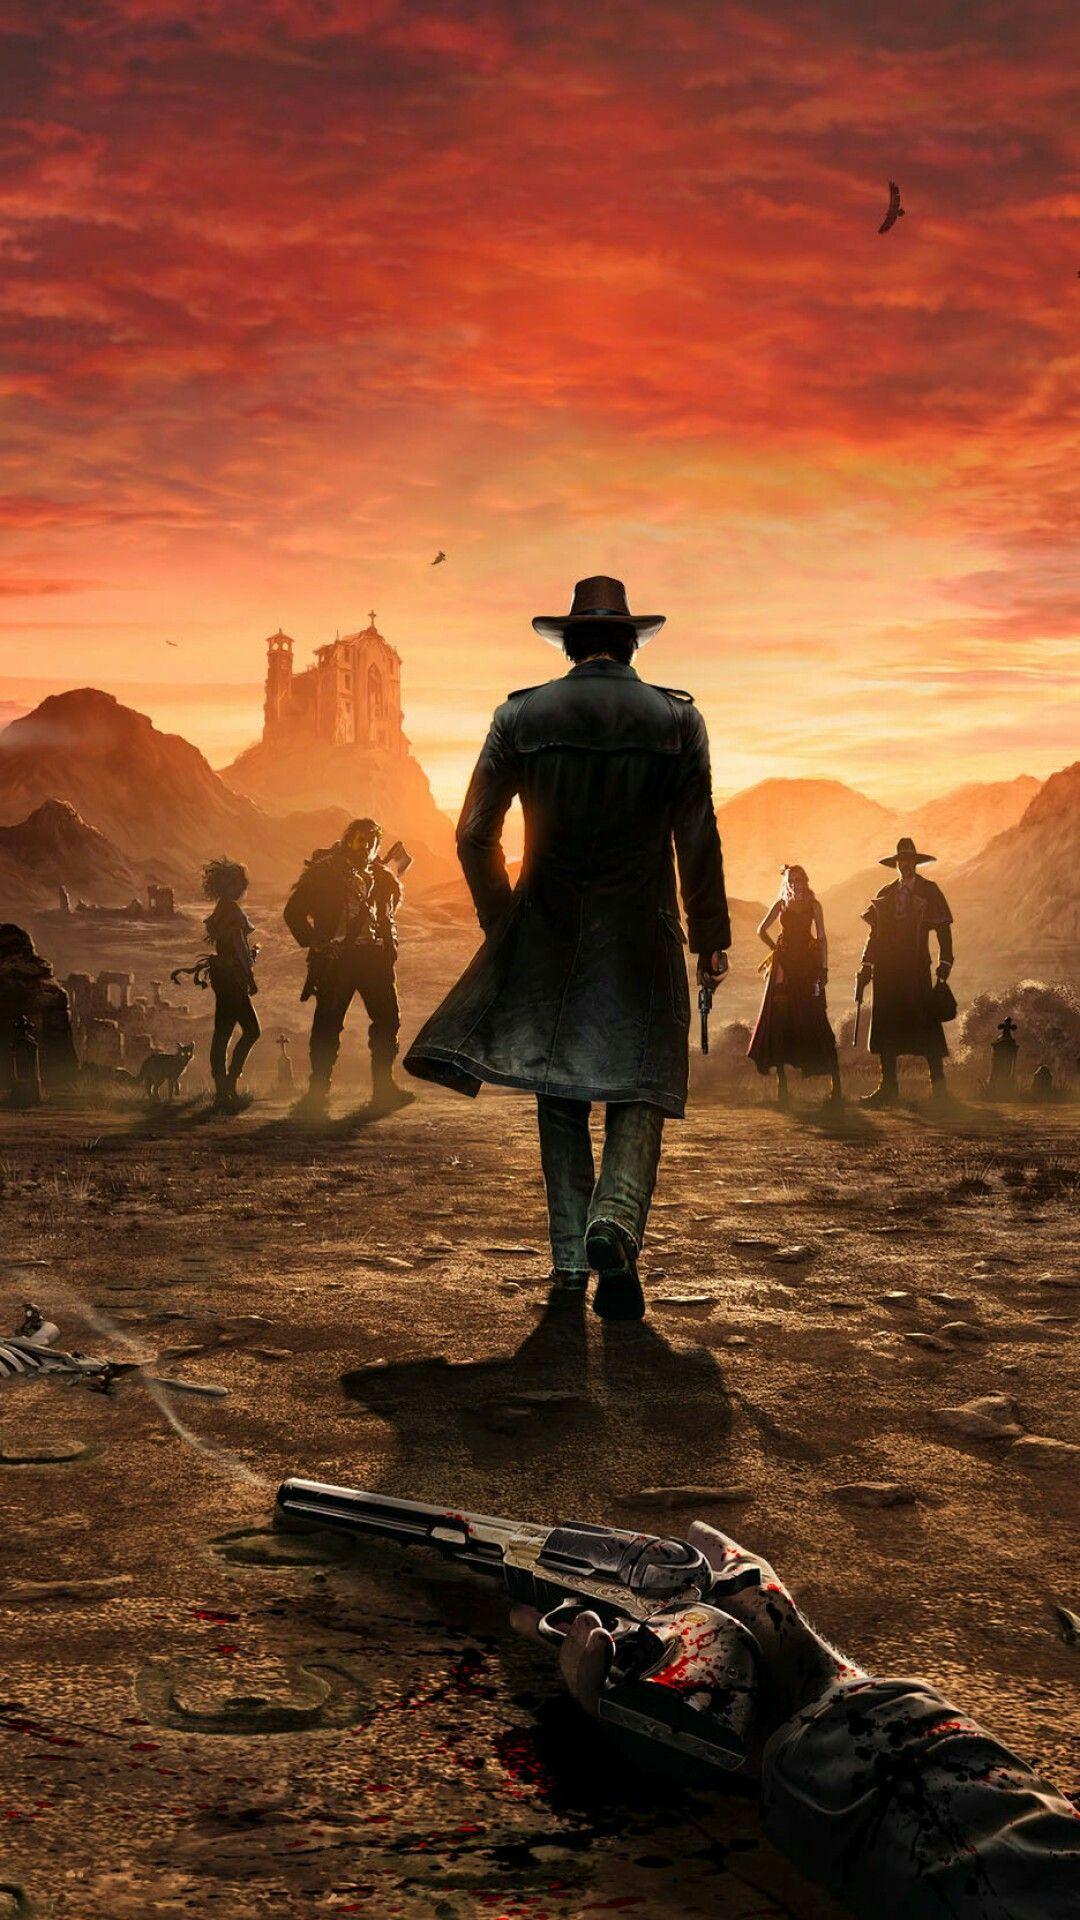 Red dead2. Break Time Is Over. Red dead redemption, Red